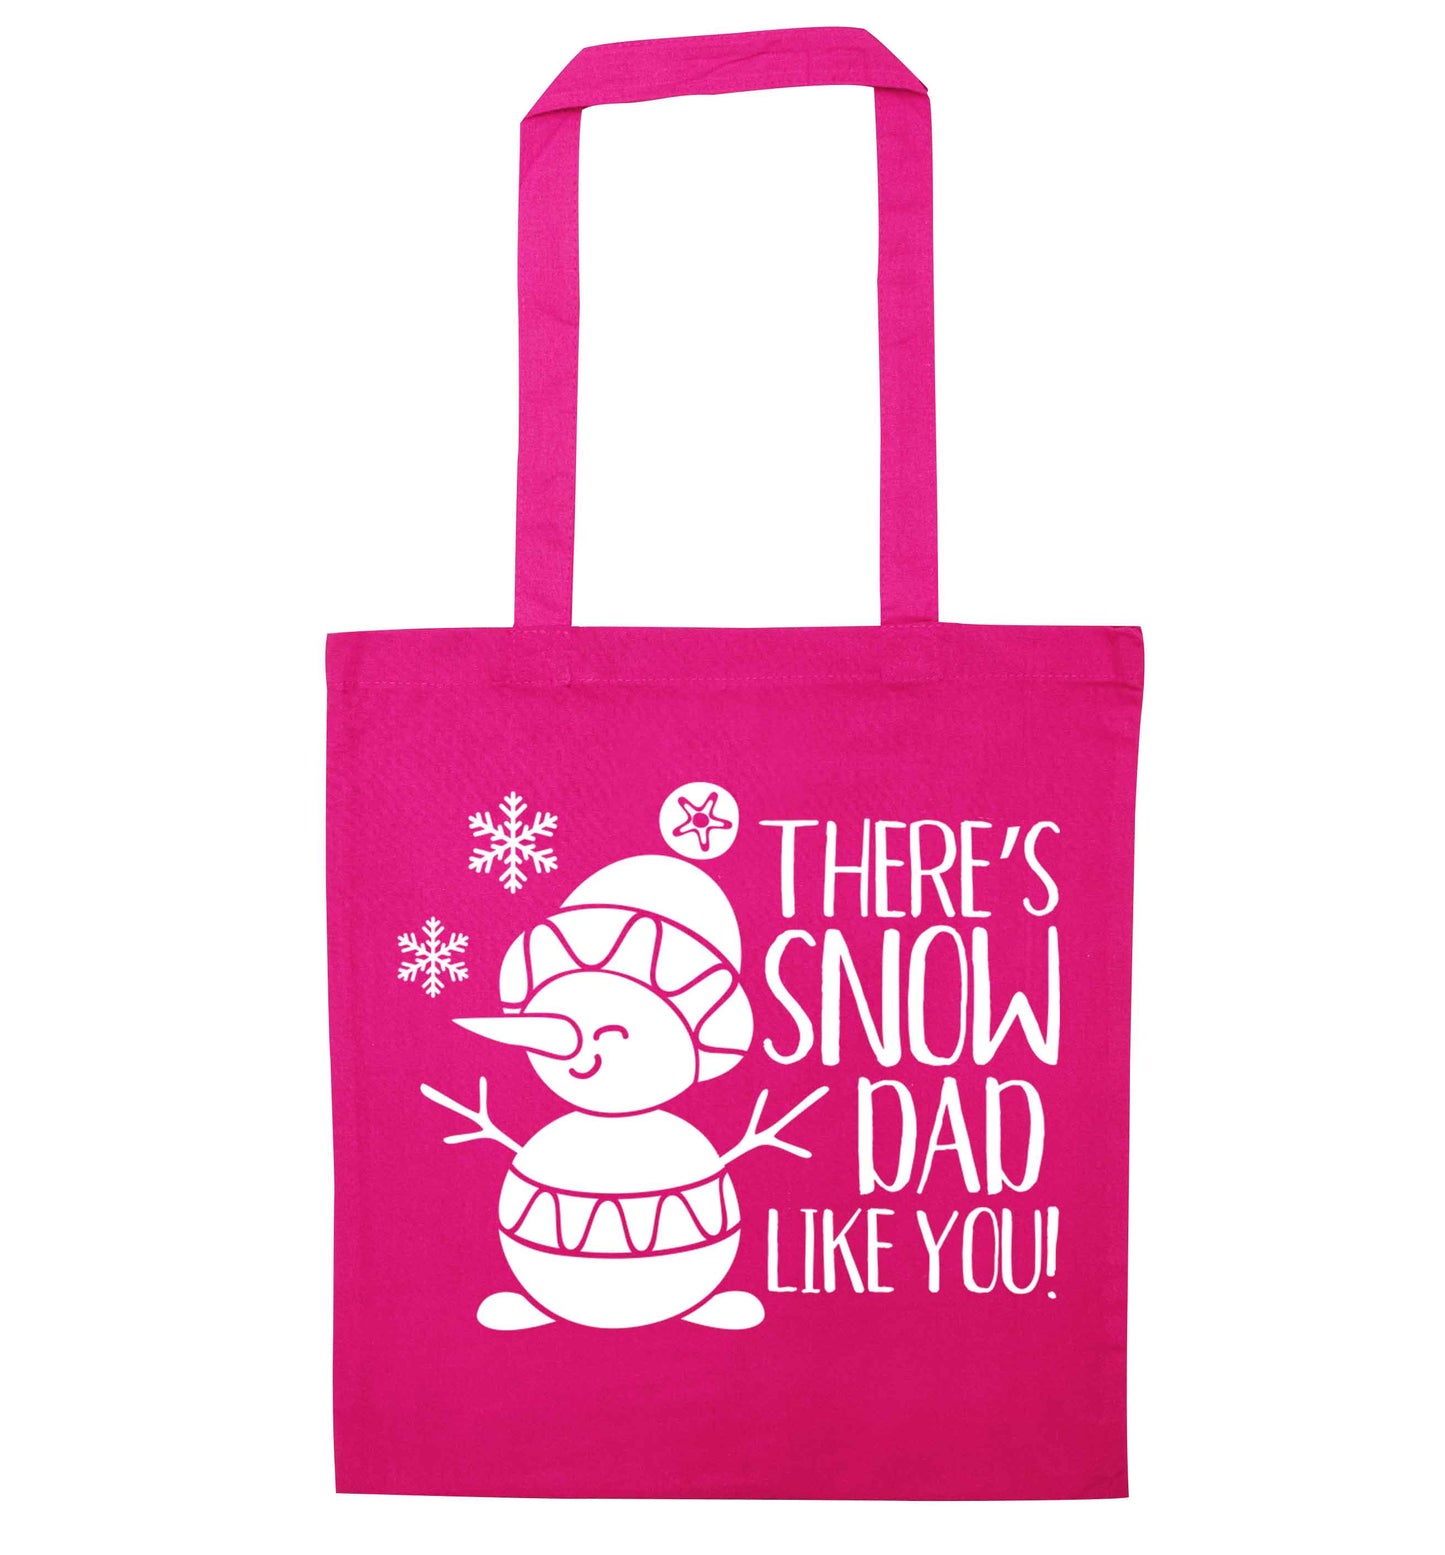 There's snow dad like you pink tote bag